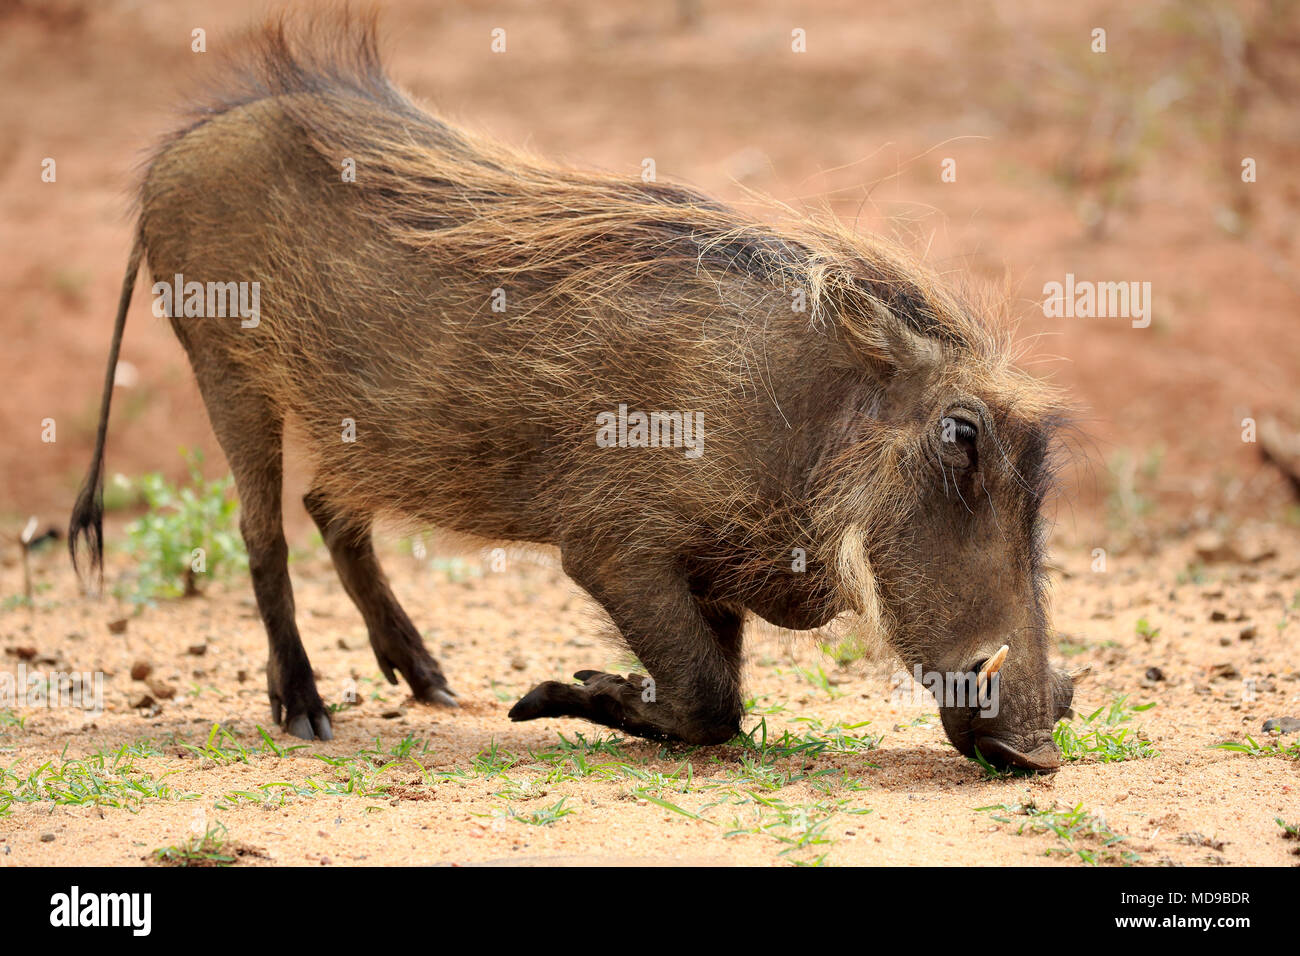 Warthog (Phacochoerus aethiopicus), Adulto alimentazione, Kruger National Park, Sud Africa Foto Stock